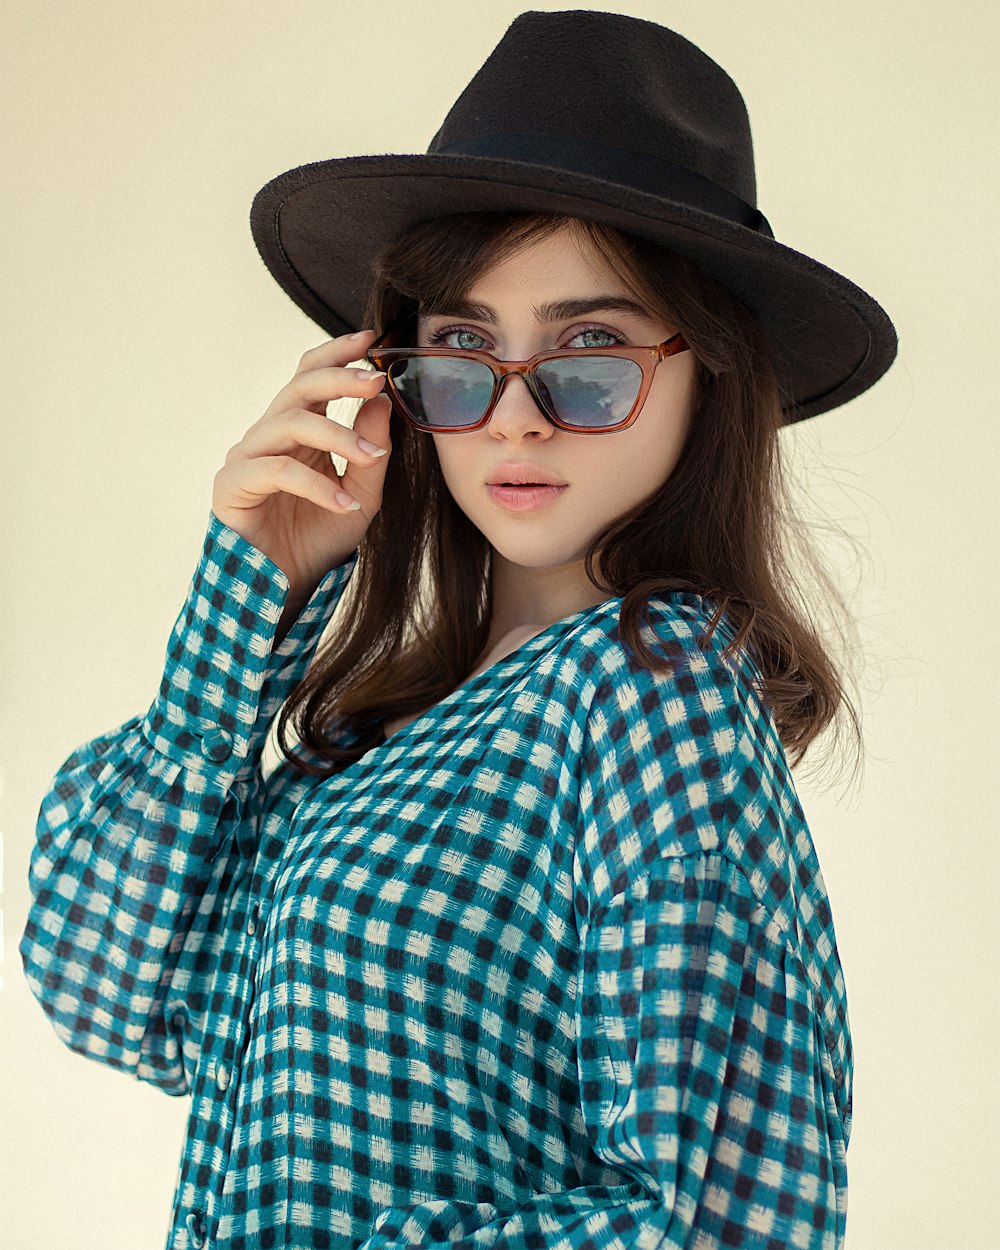 a person wearing a hat and sunglasses